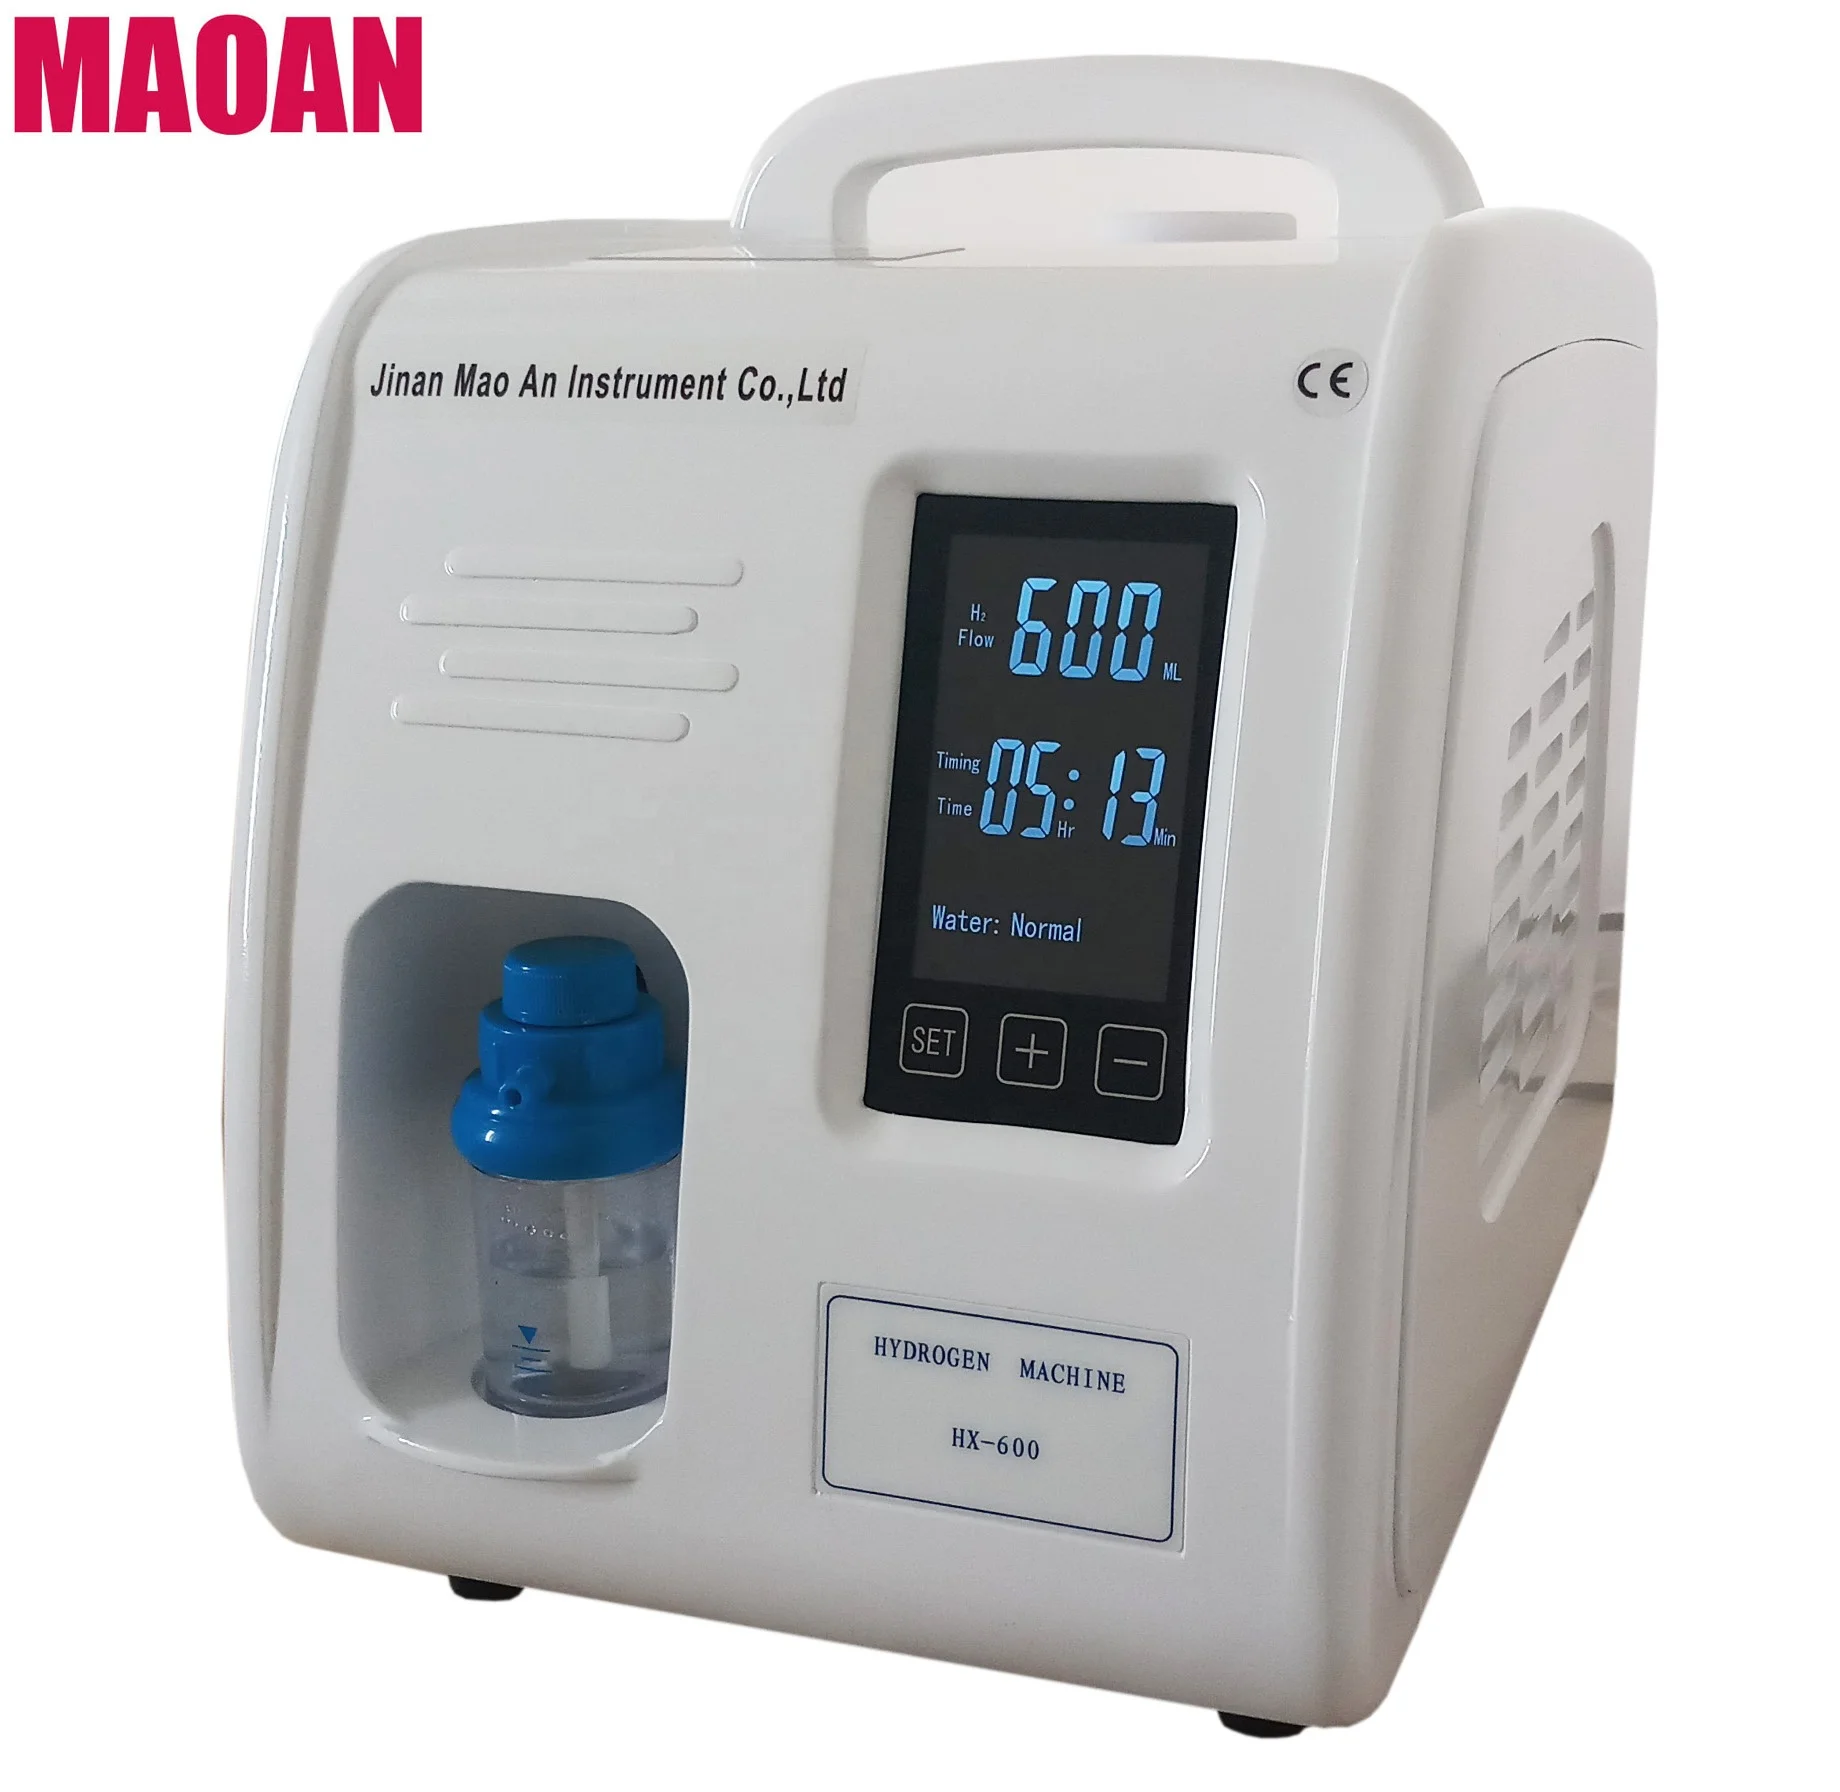 
Hydrogen Gas Generator Price for Breathing H2 water and Skin Treatment used at home for health  (62369469911)